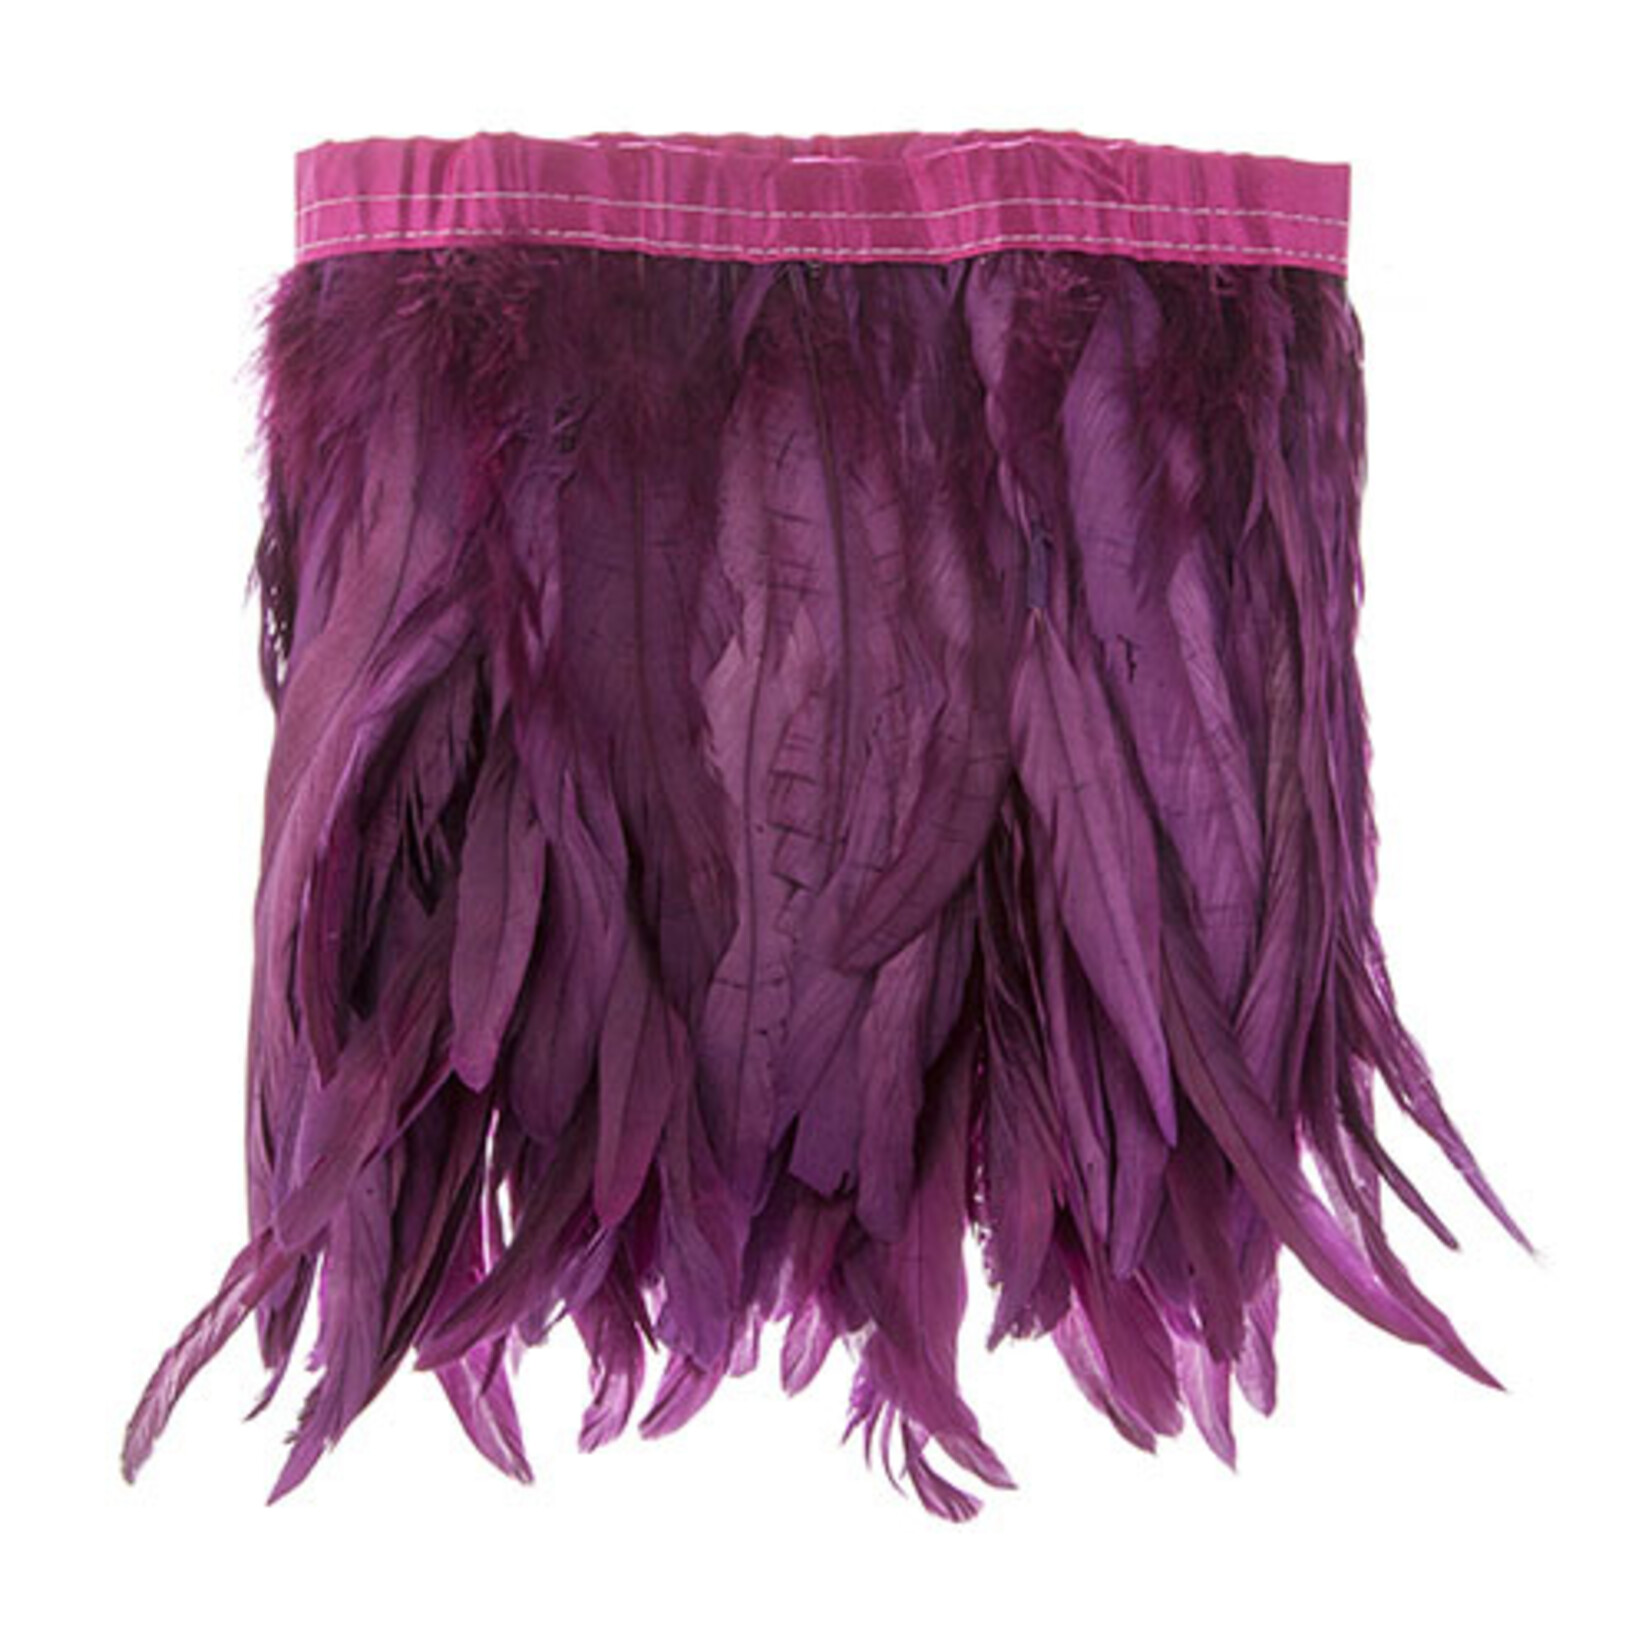 Coque Feathers Value 8-10 Inches 1 Yard  Plum